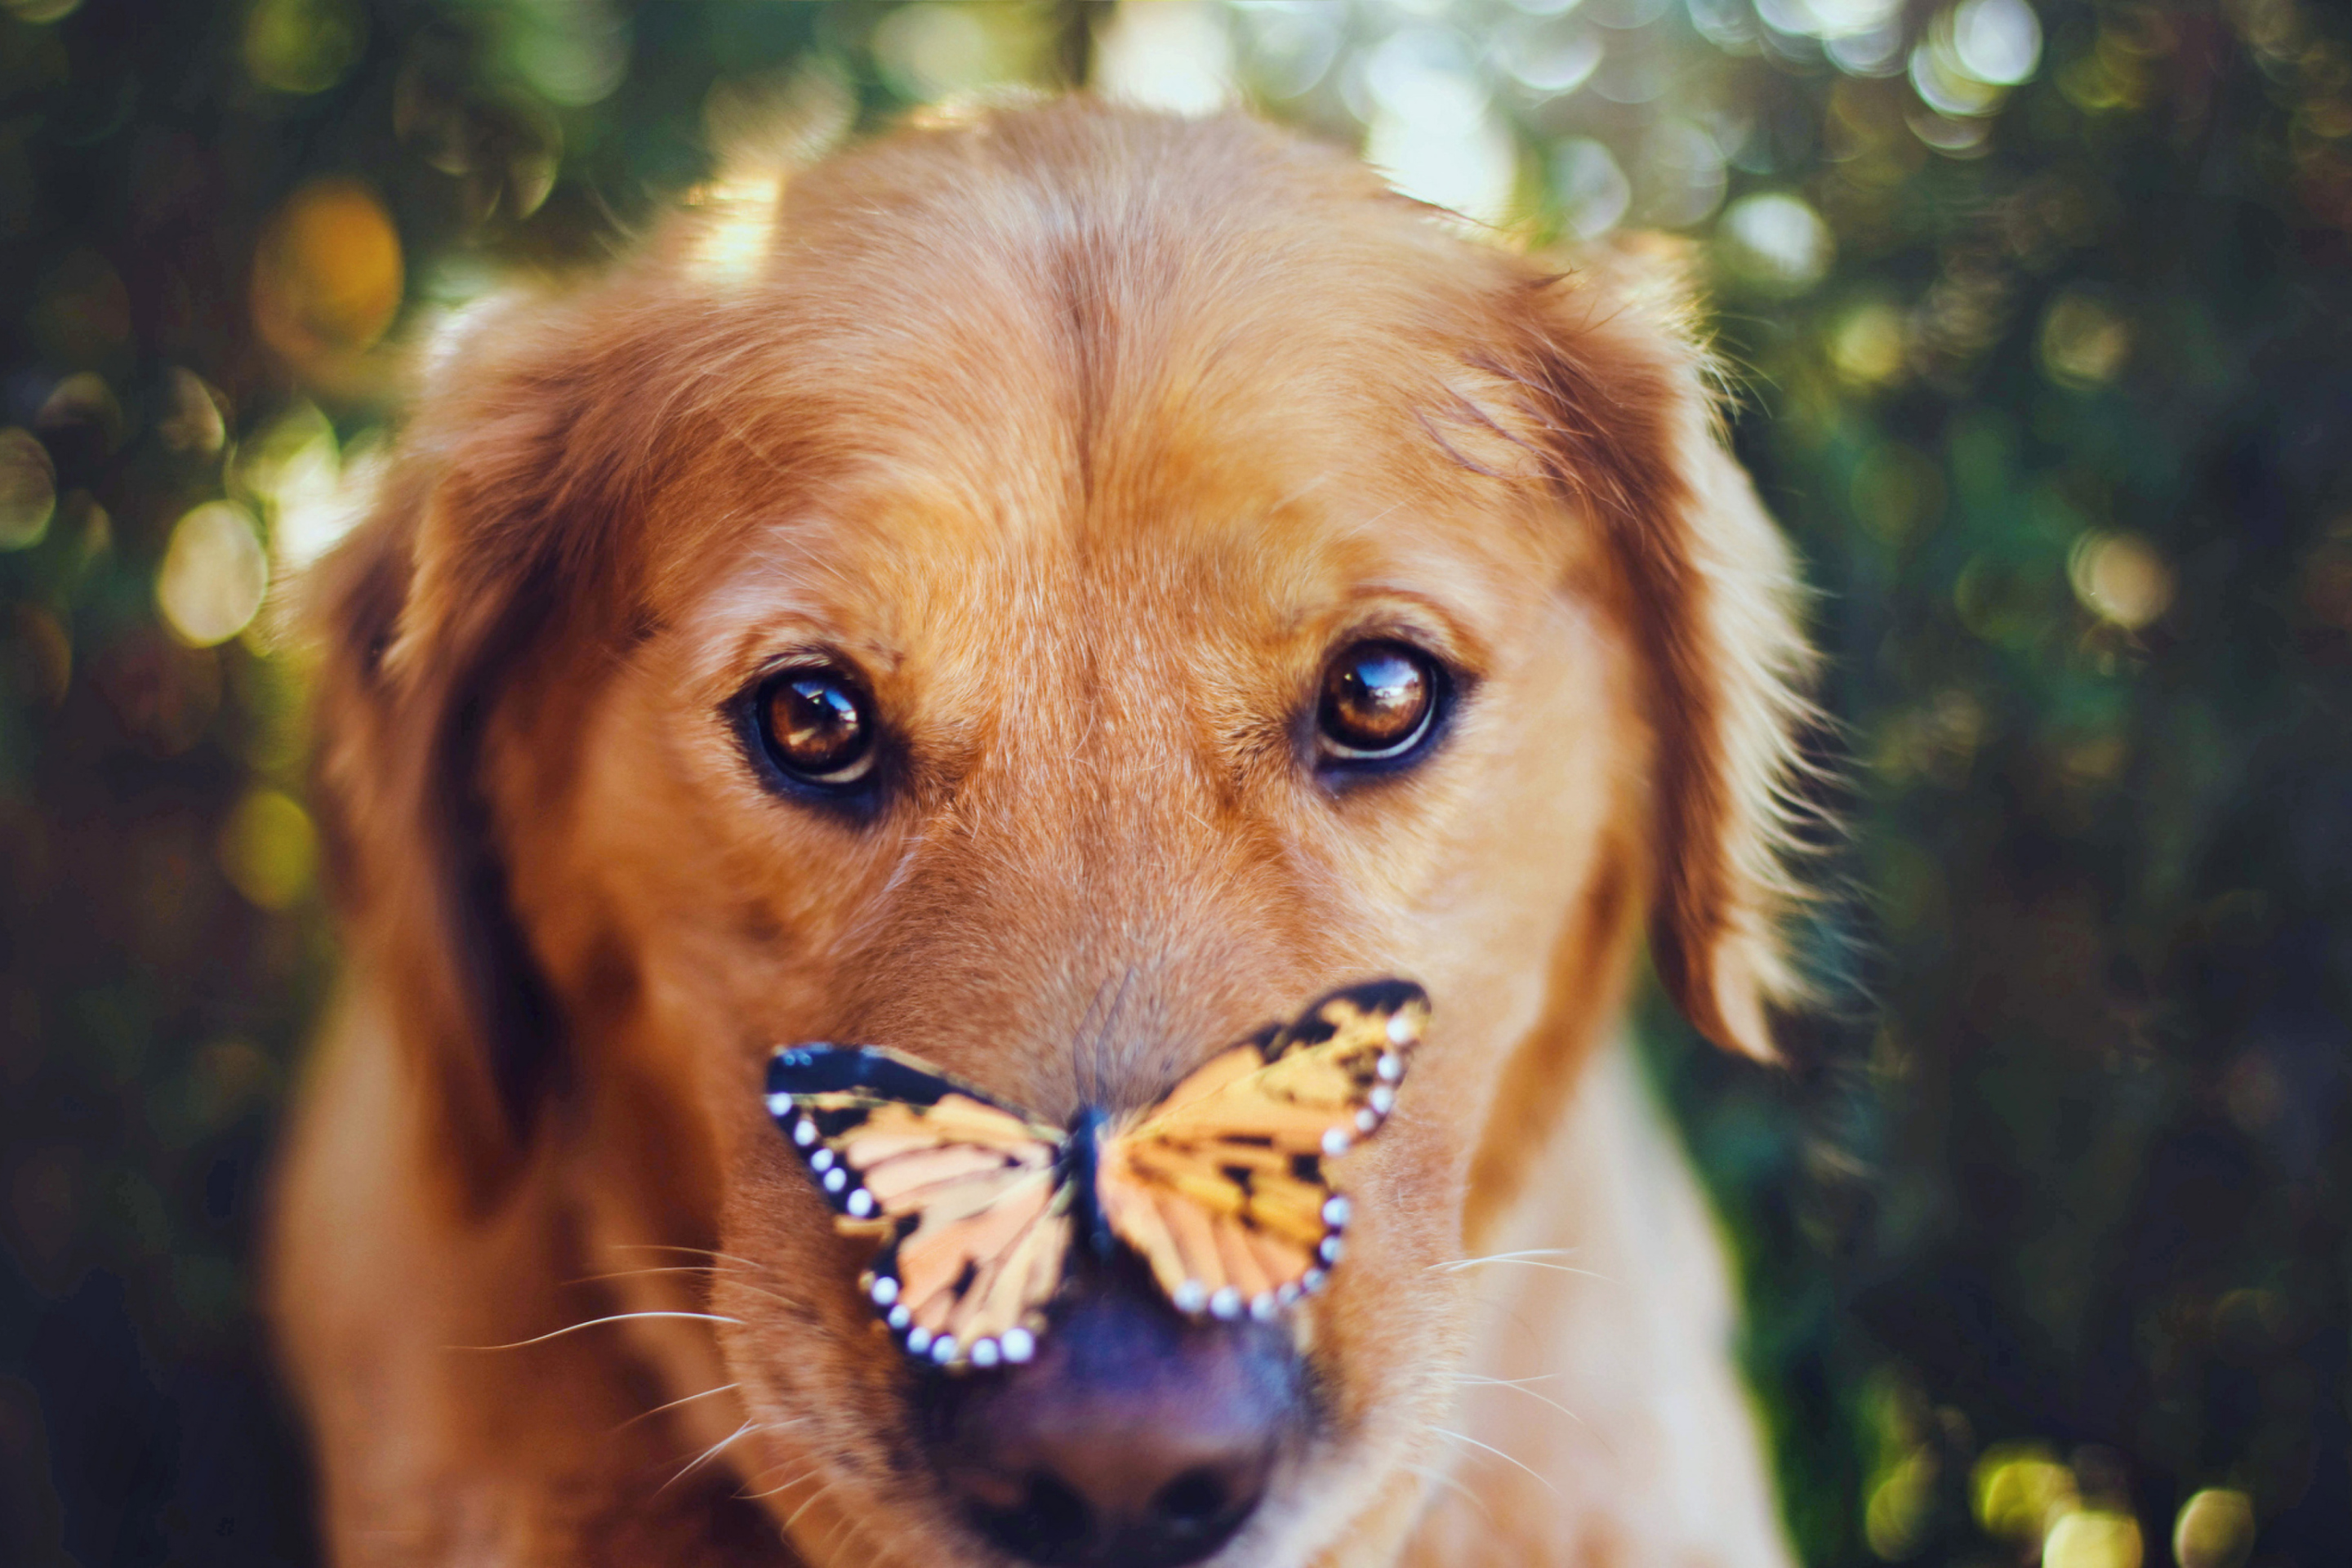 Dog And Butterfly wallpaper 2880x1920